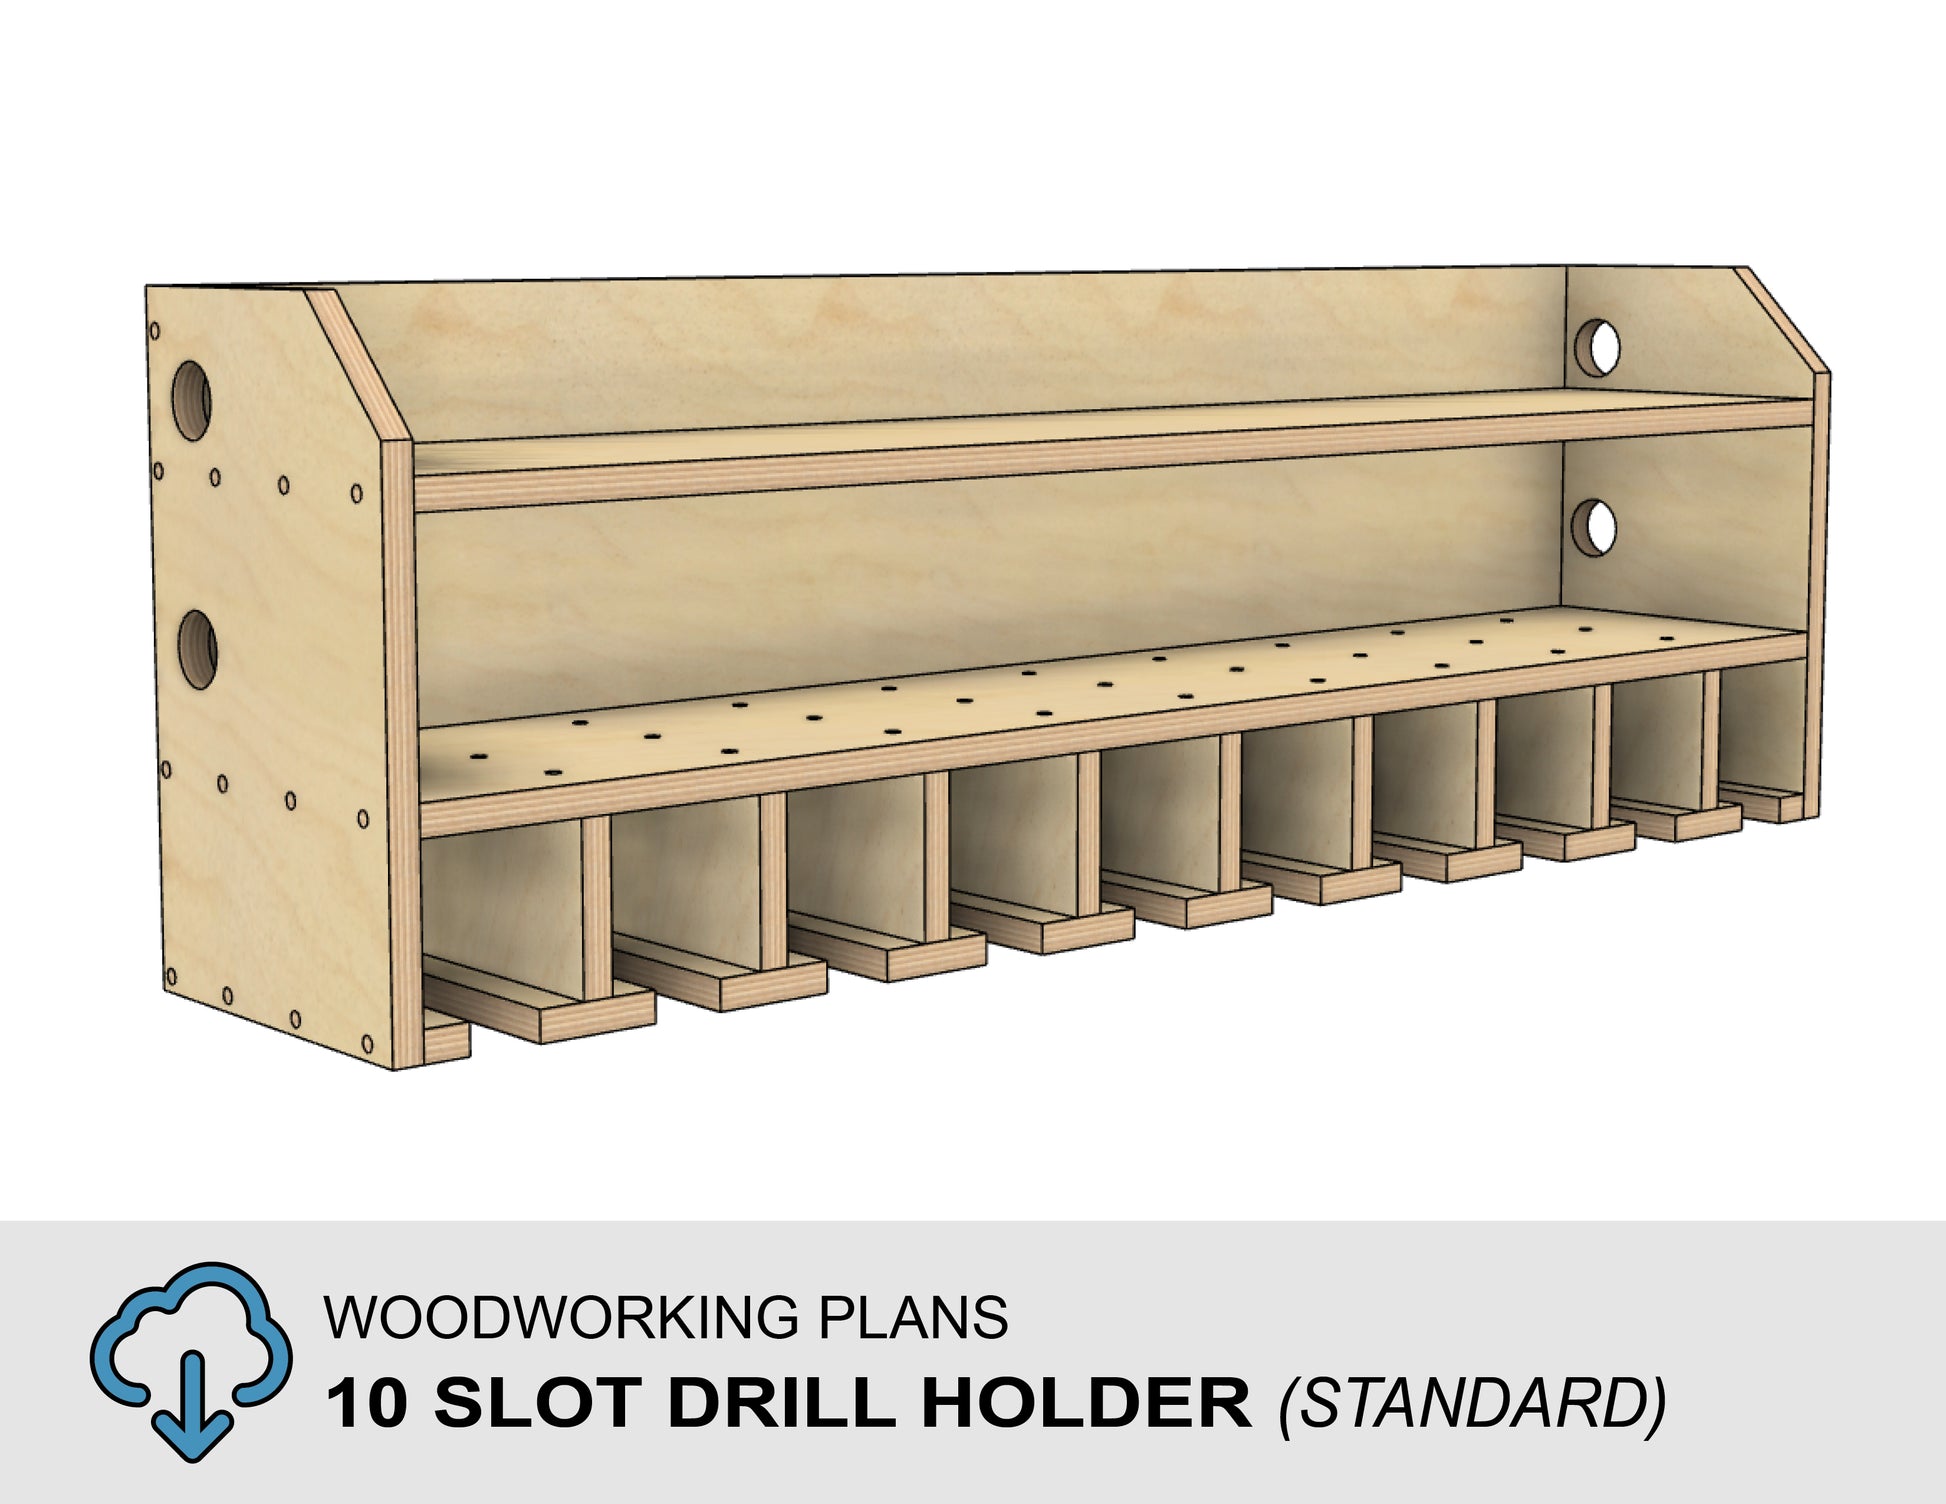 DIY woodworking plans for building a 10 slot drill storage cabinet from plywood in a garage workshop